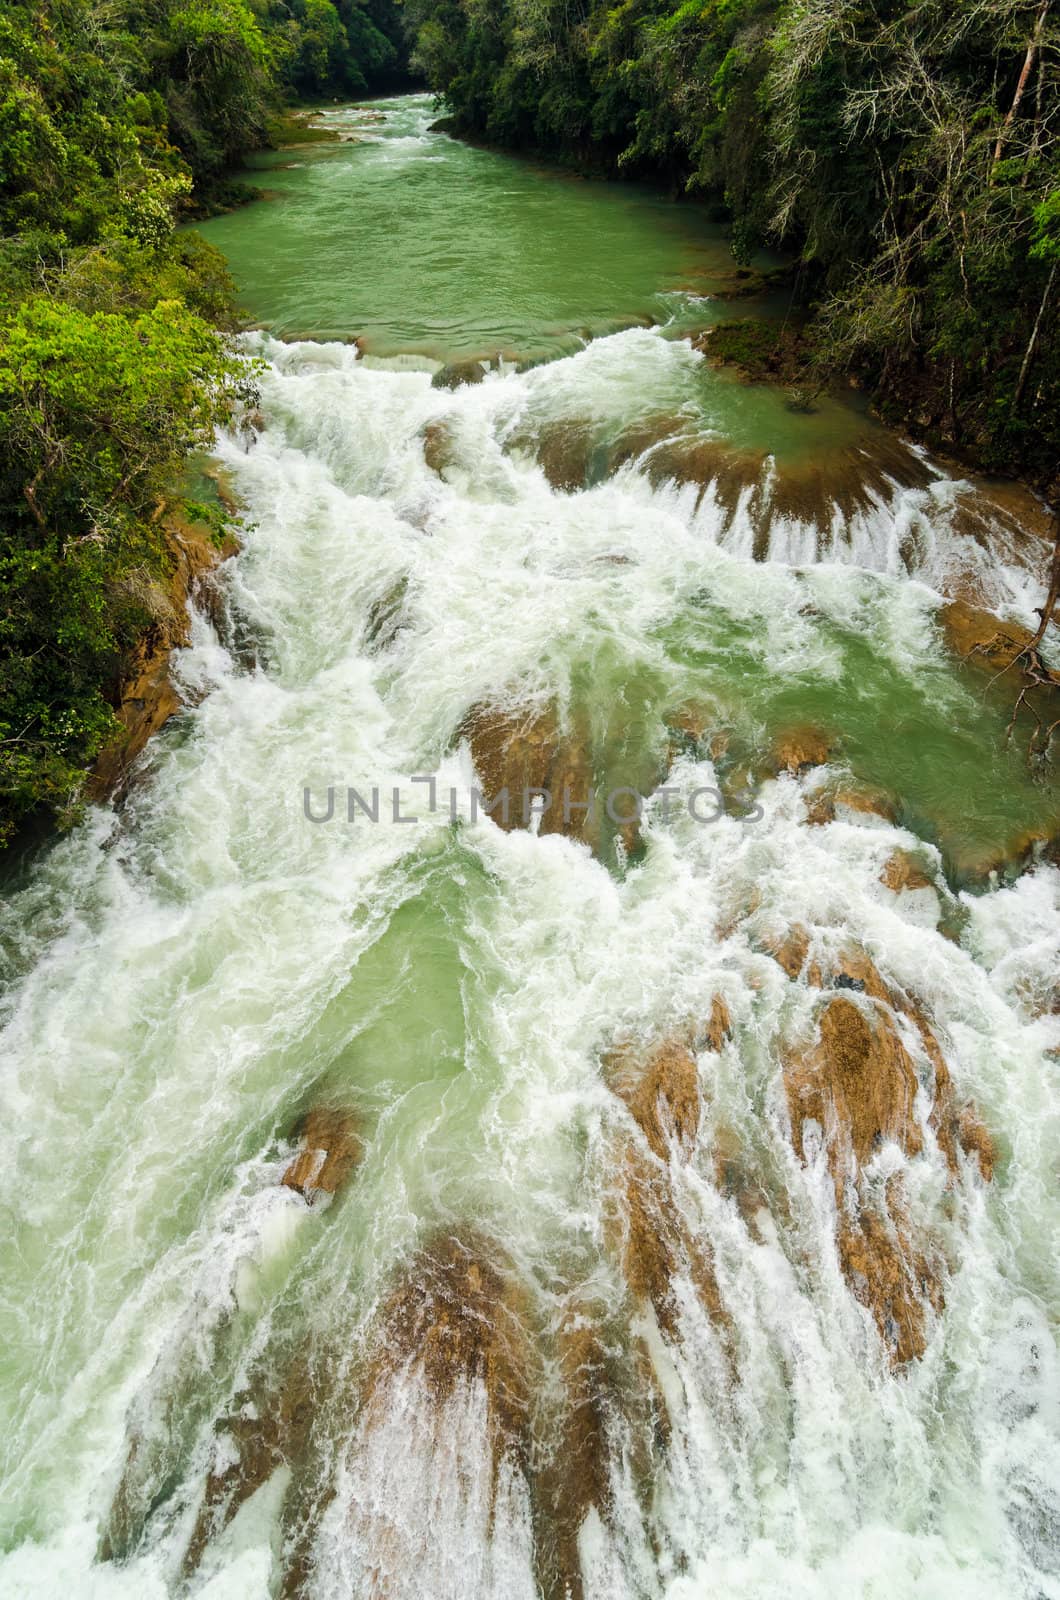 A turbulent river in running through Chiapas in the south of Mexico